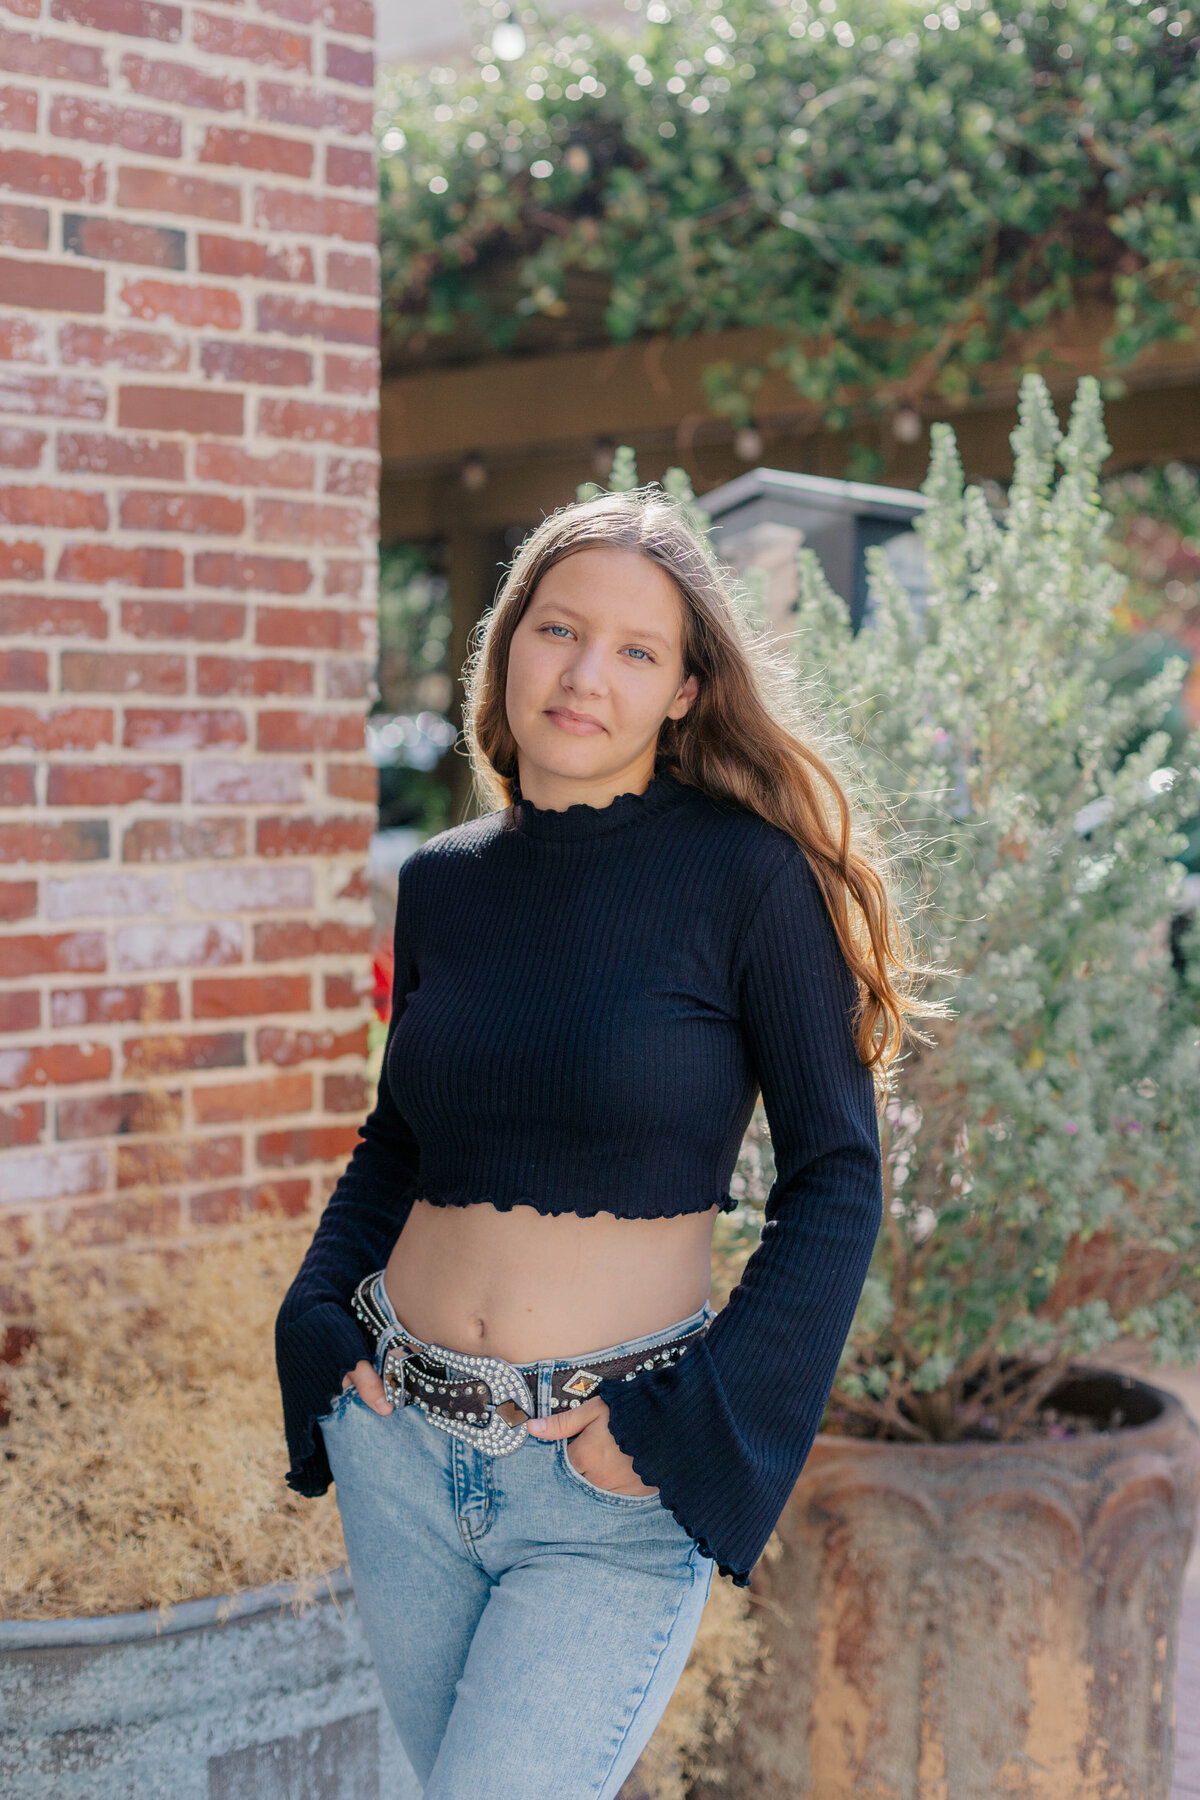 Senior girl stands in a black long sleeve crop top and jeans with a bejeweled belt with her hands in her pockets